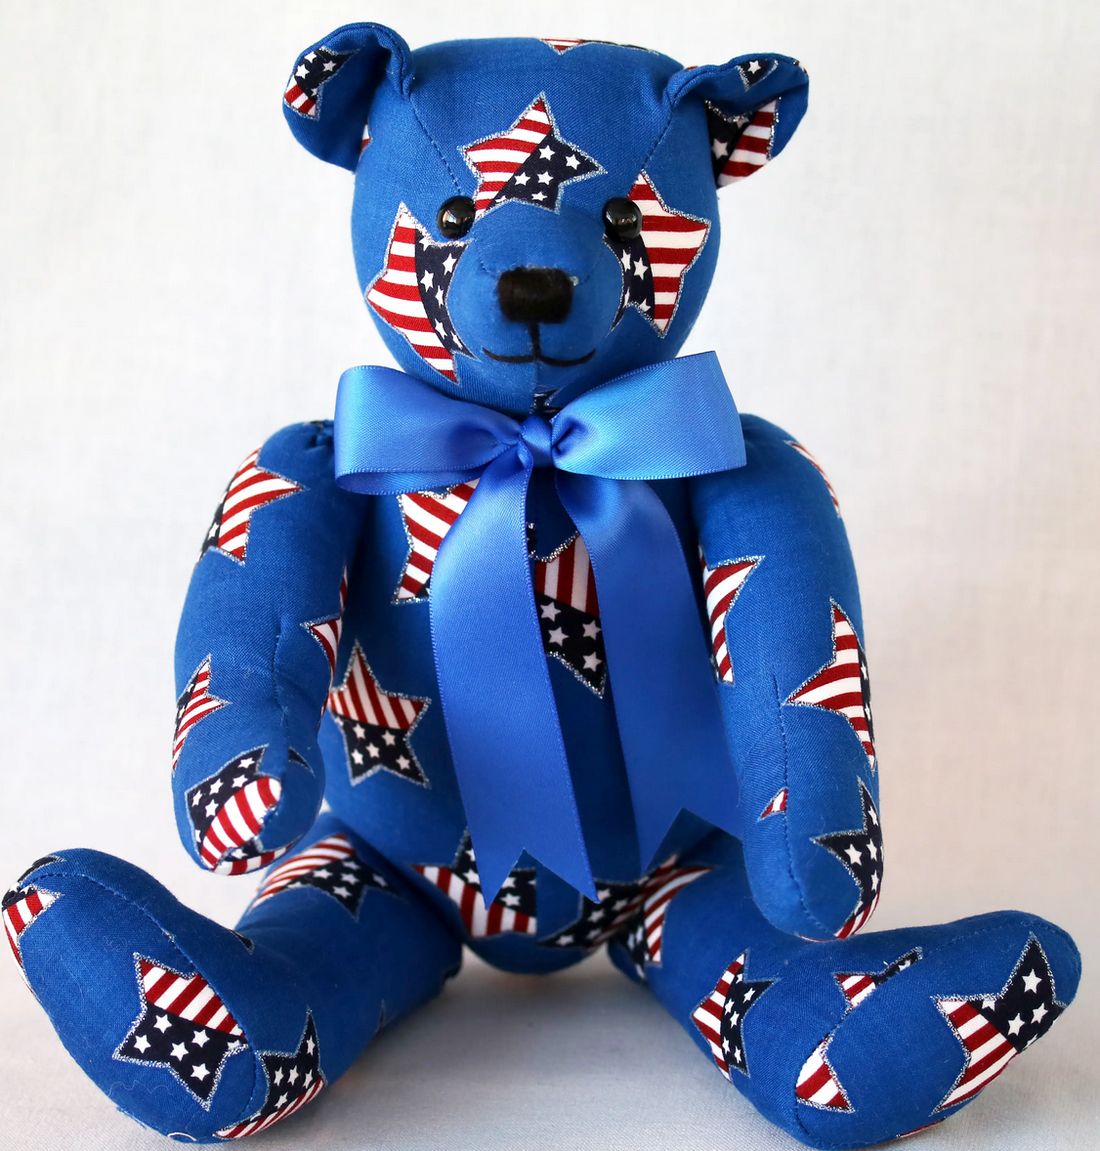 Stars - 26" Patriotic Limited Edition Bear from Canterbury Bears